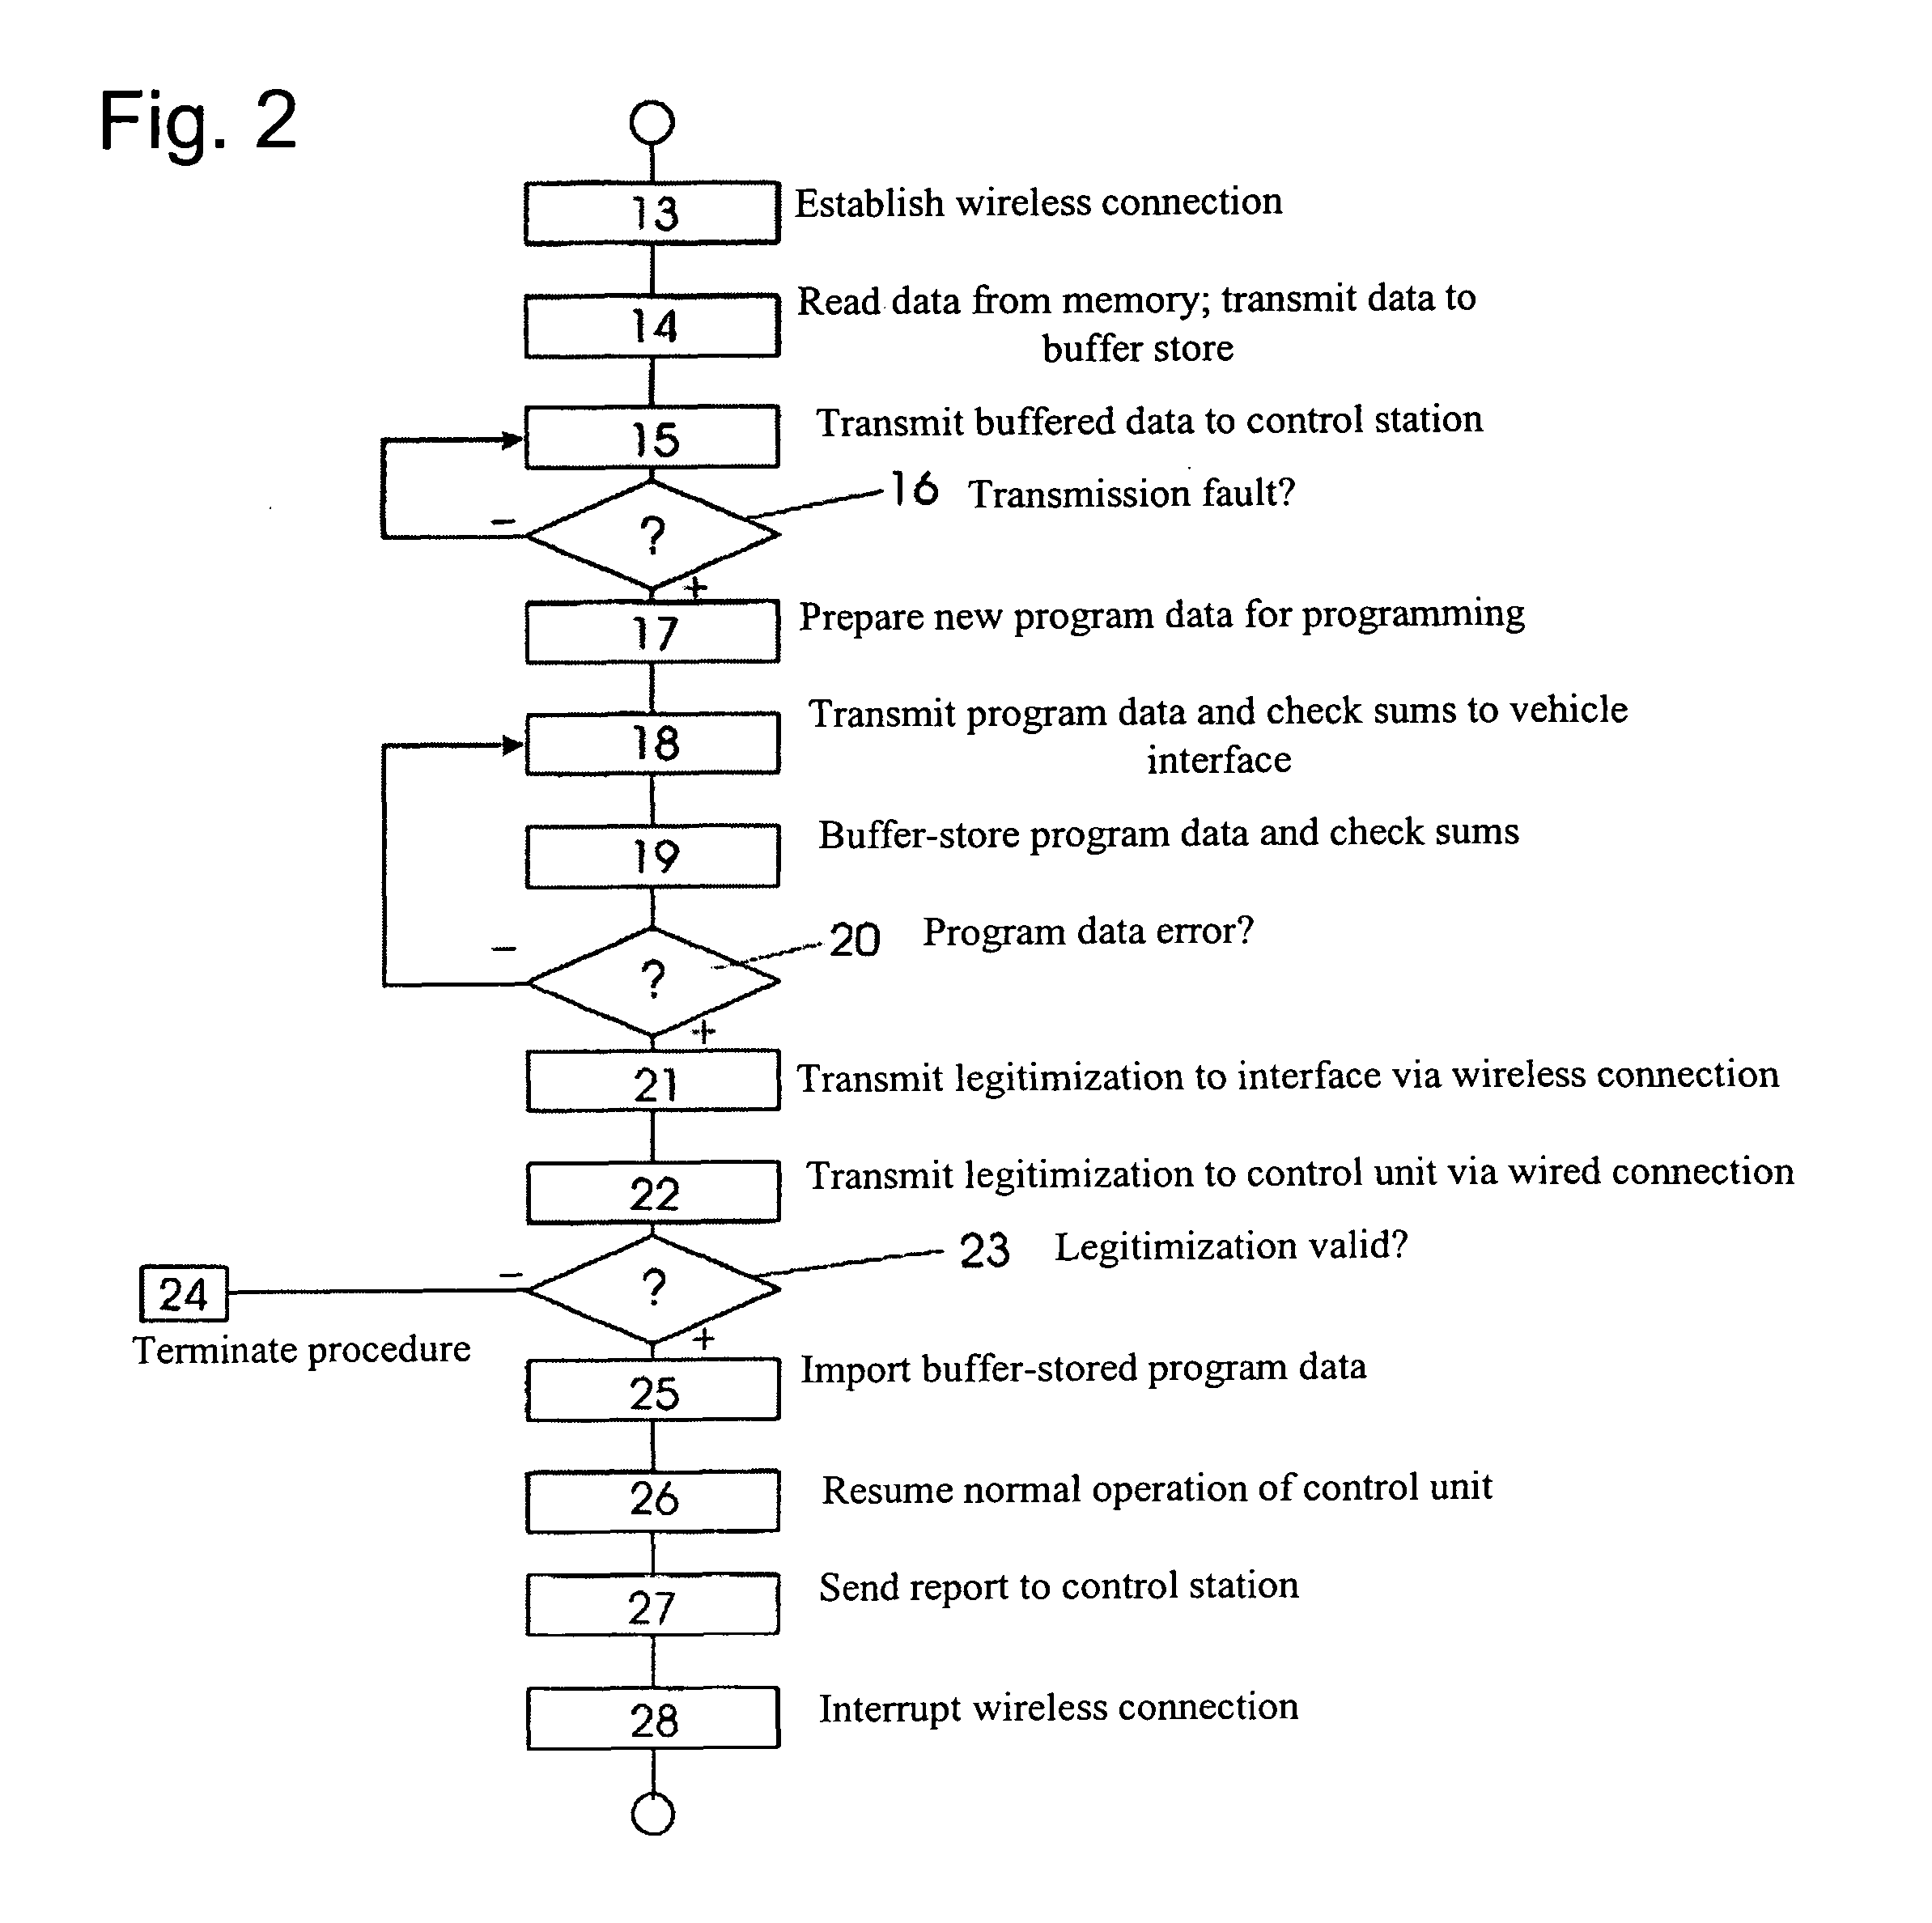 Method and system for remote programming of a program-controlled device using a legitimization code